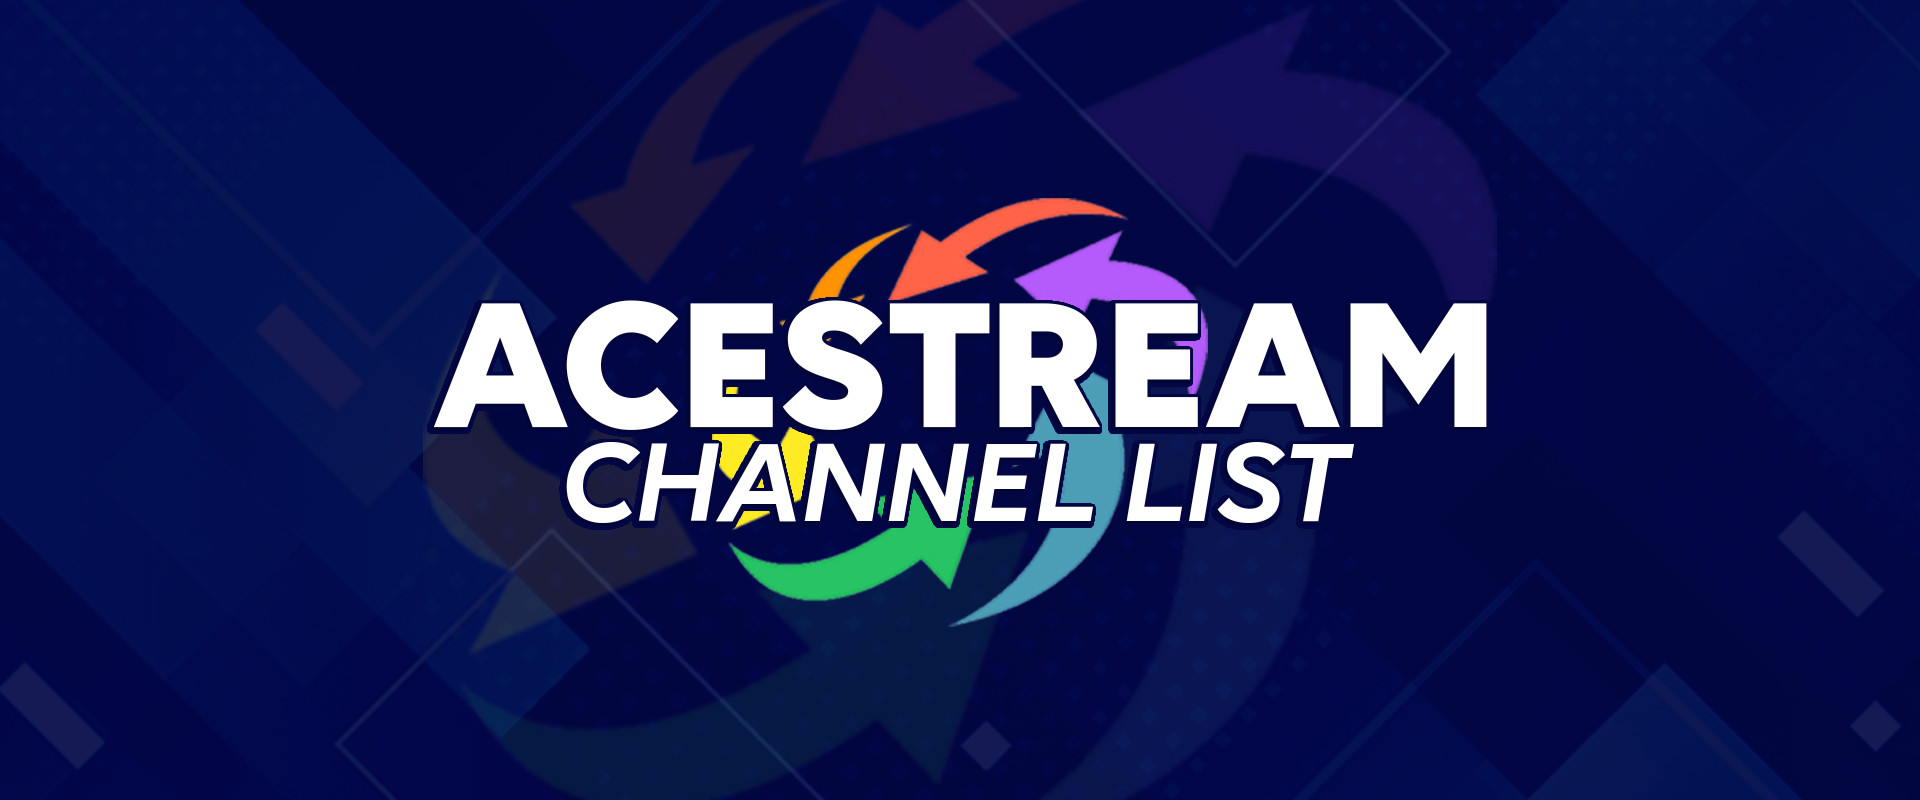 Acestream Channel List